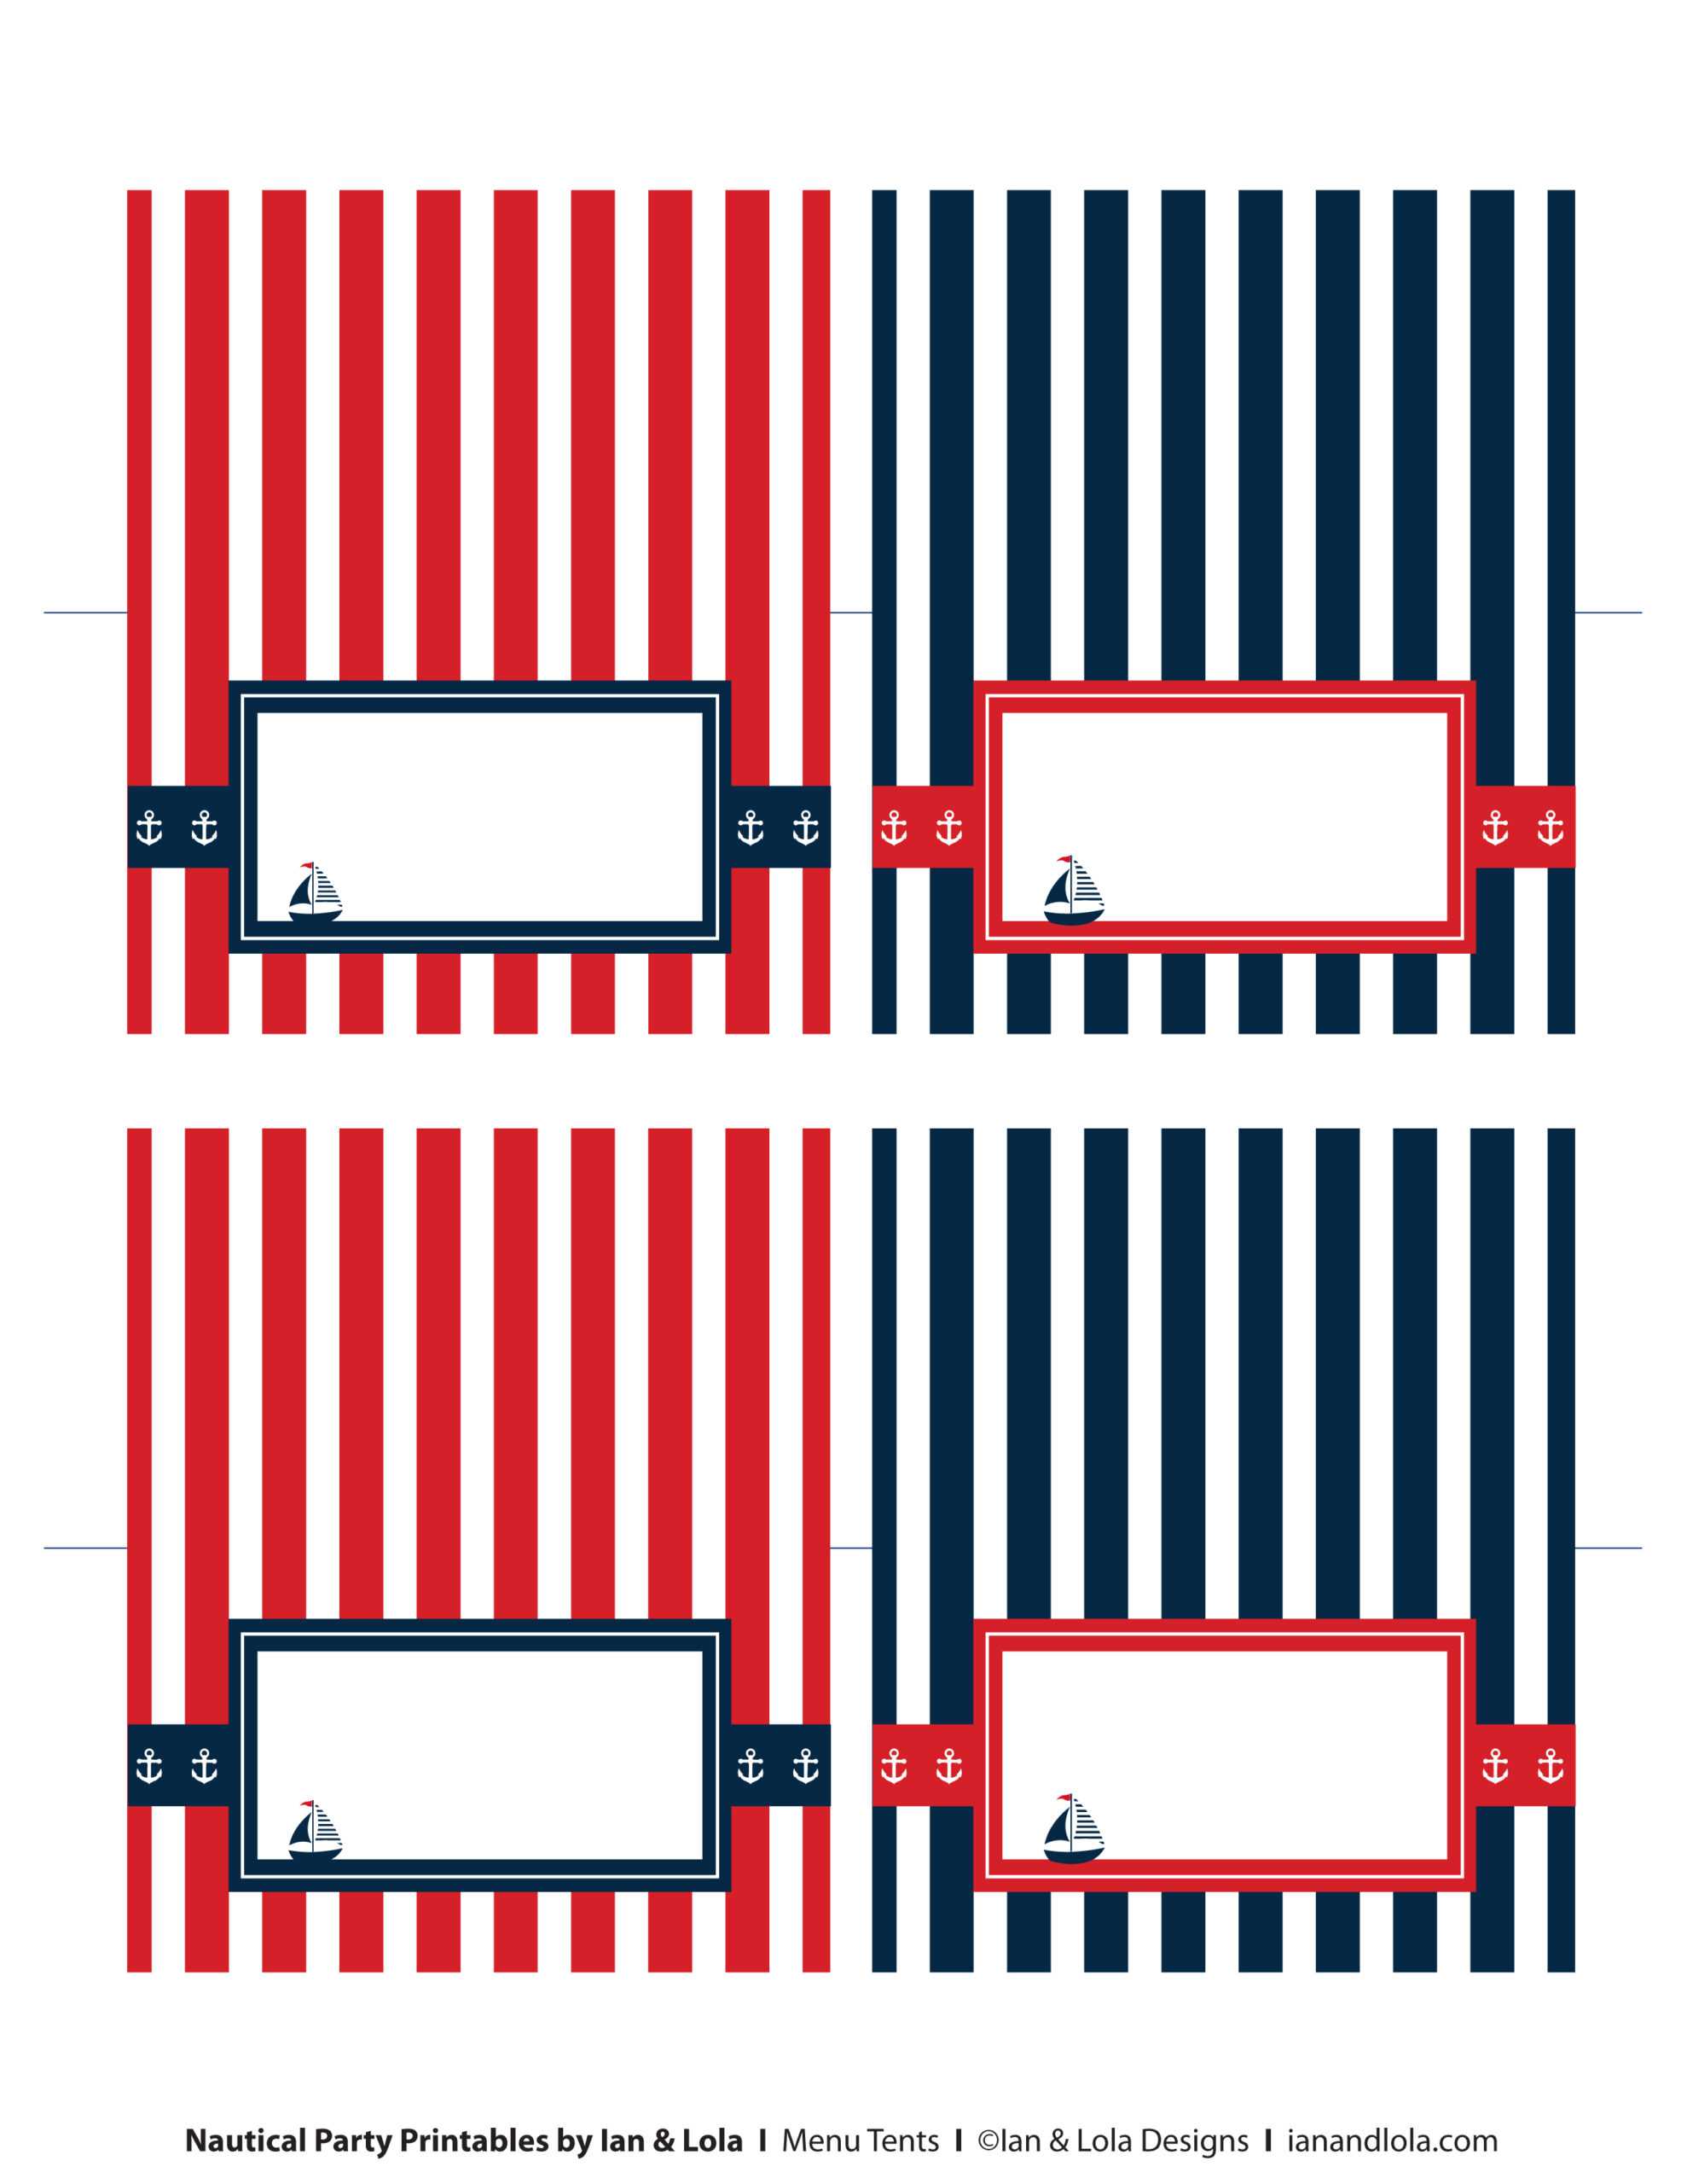 Free Nautical Party Printables From Ian & Lola Designs For Nautical Banner Template